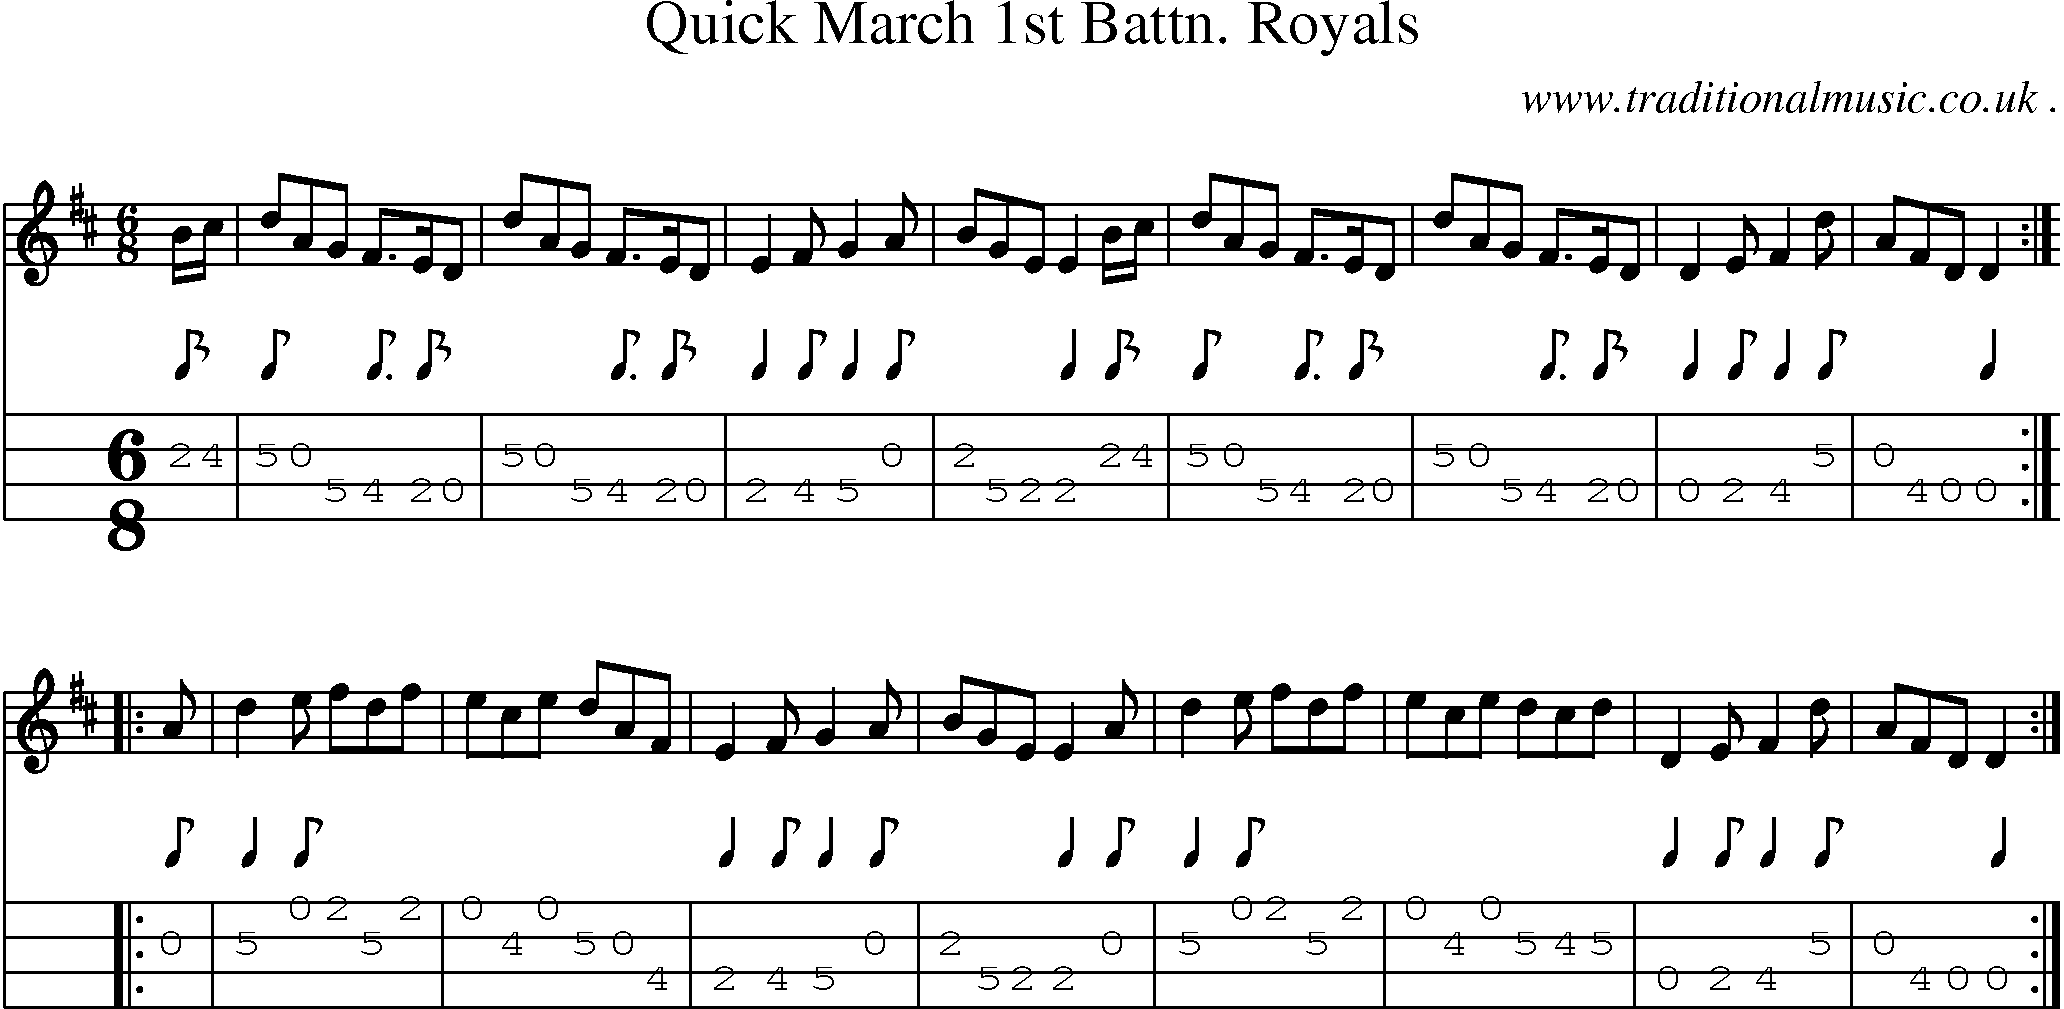 Sheet-Music and Mandolin Tabs for Quick March 1st Battn Royals